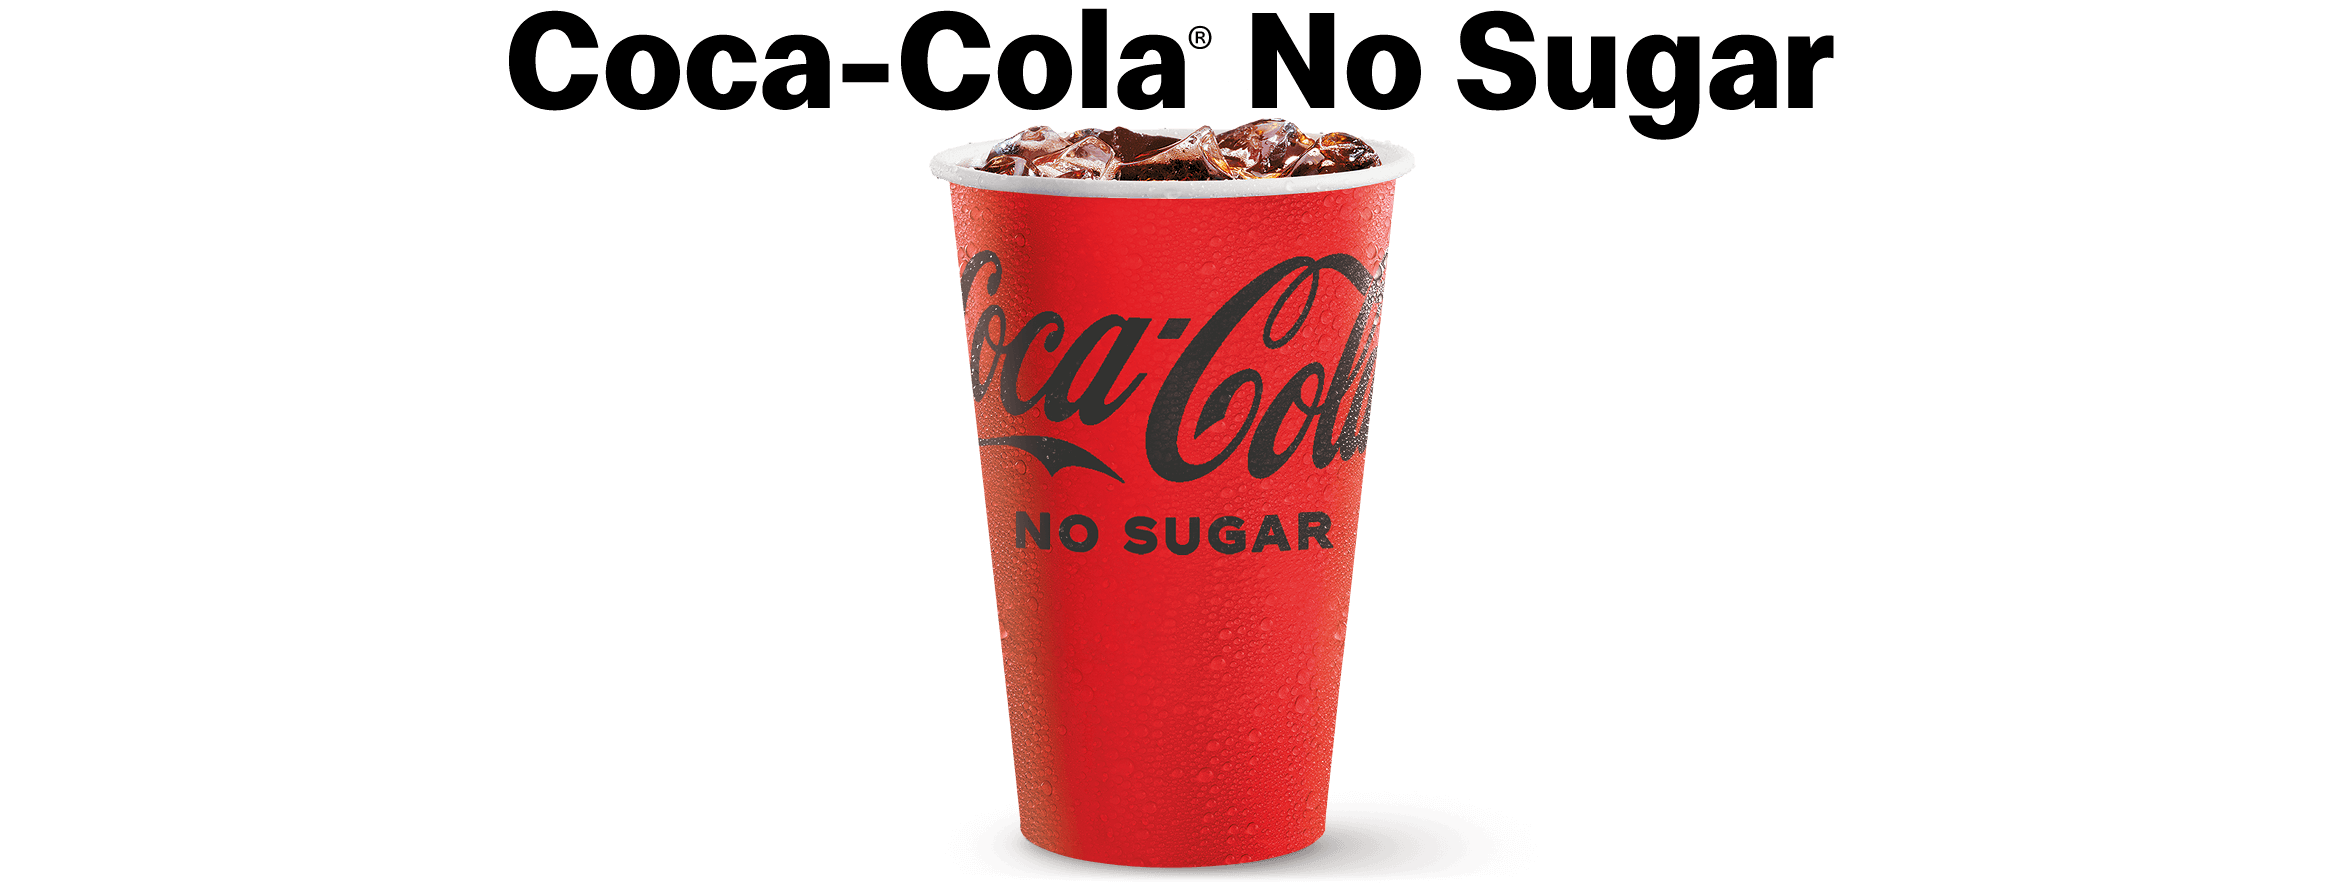 Free Coke No Sugar on your app order at McDonalds(Pick Up only)